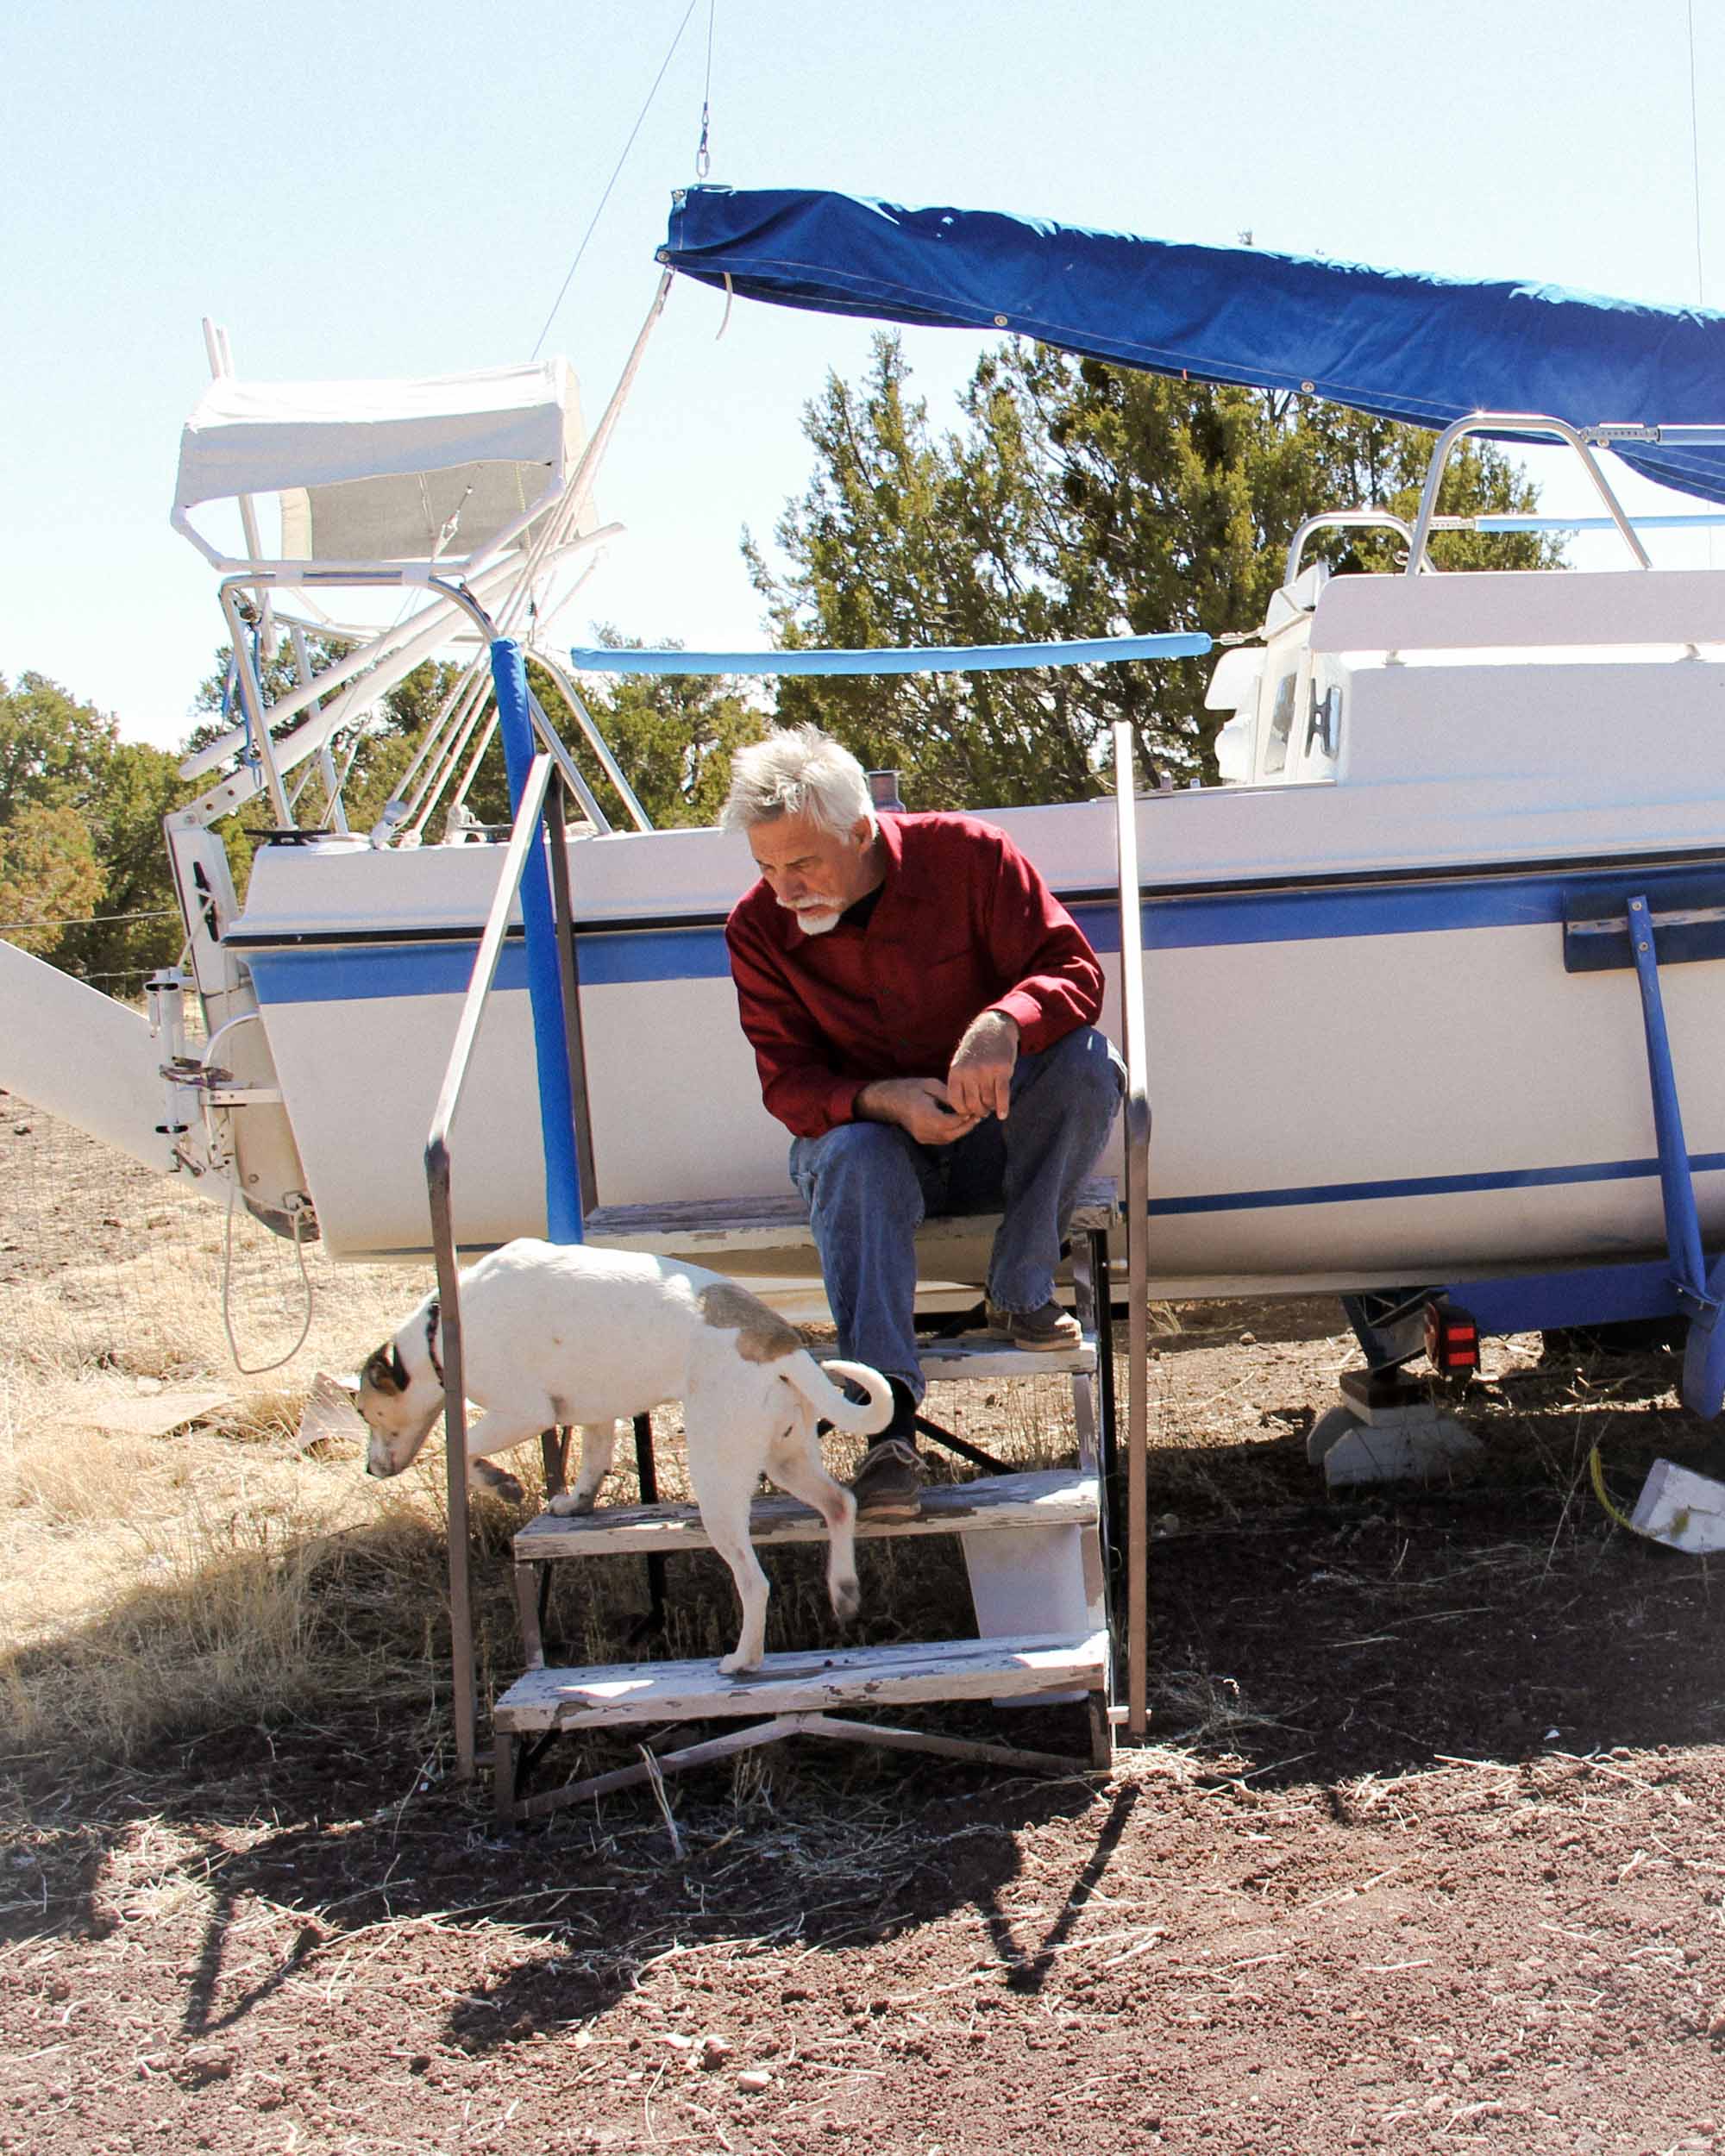 Dave Bixby at his home in Northern Arizona. Photo by Isvett Verde.